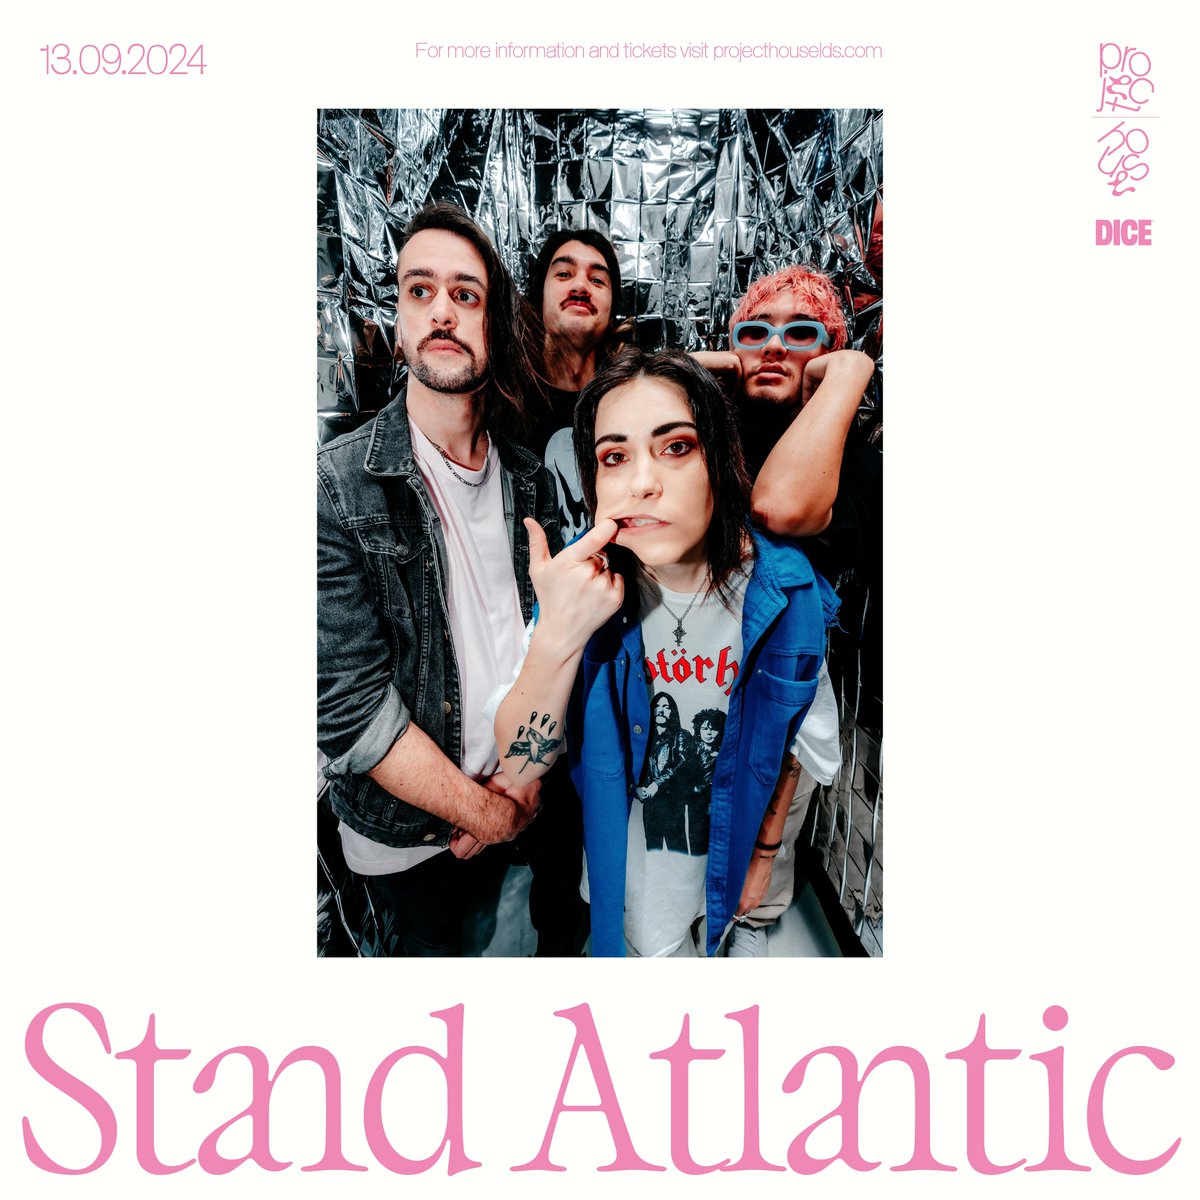 After a huge week of announcements, we're excited to bring you the 5th and final show! 13.09 @slamdunkleeds bring @standatlantic to Project House. Tickets on sale now. Hit the link below to grab yours. buff.ly/3VZnLMa